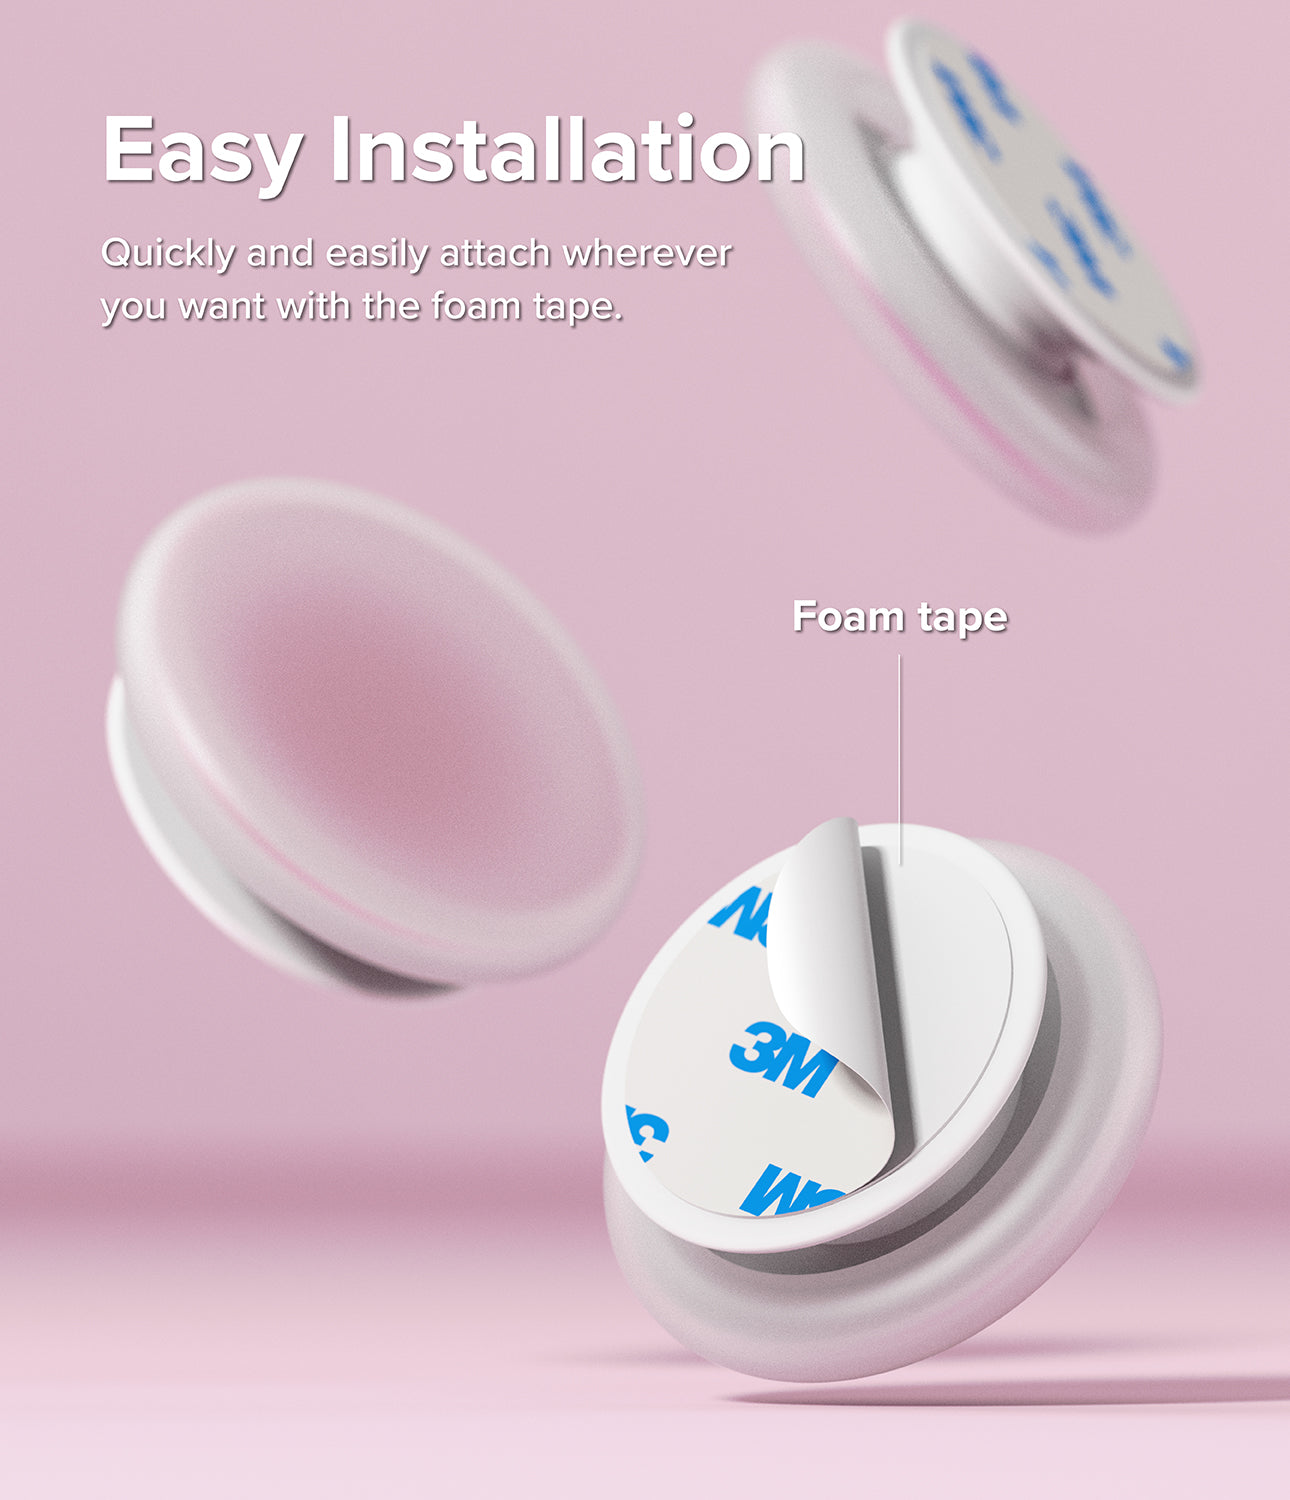 Ringke Tok - Easy Installation. Quickly and easily attach wherever you want with the form tape